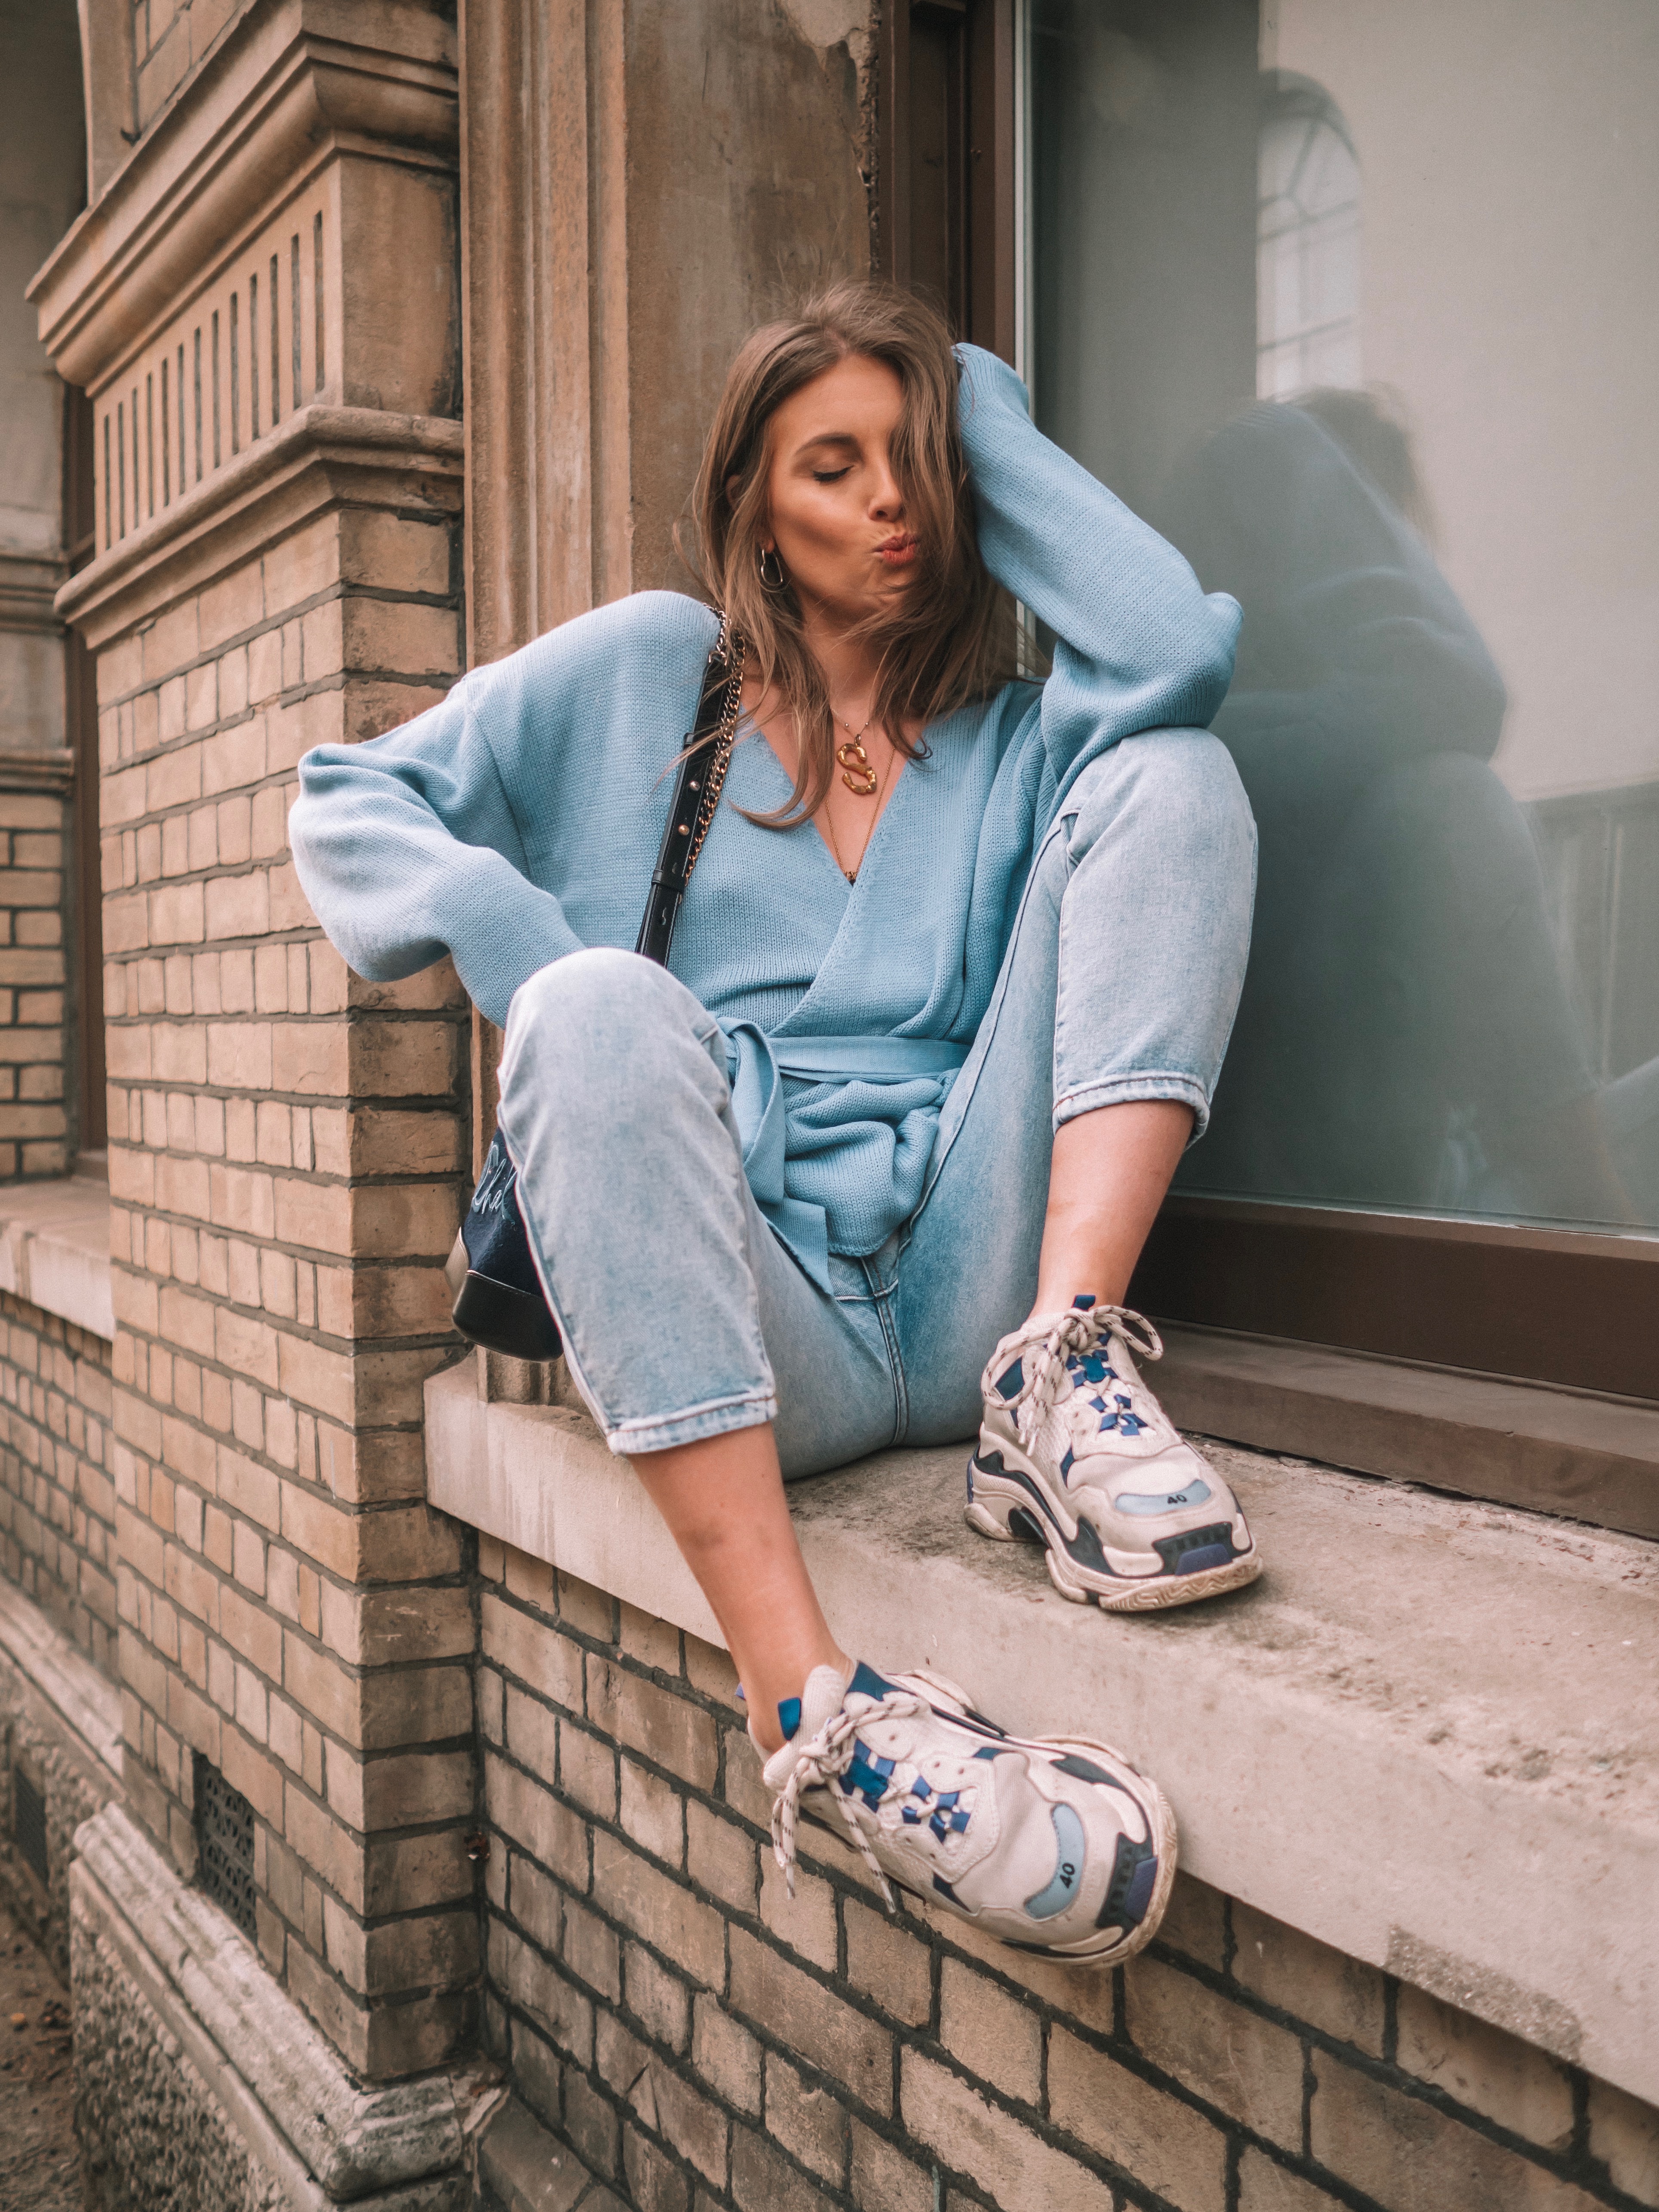 lorna luxe in the style